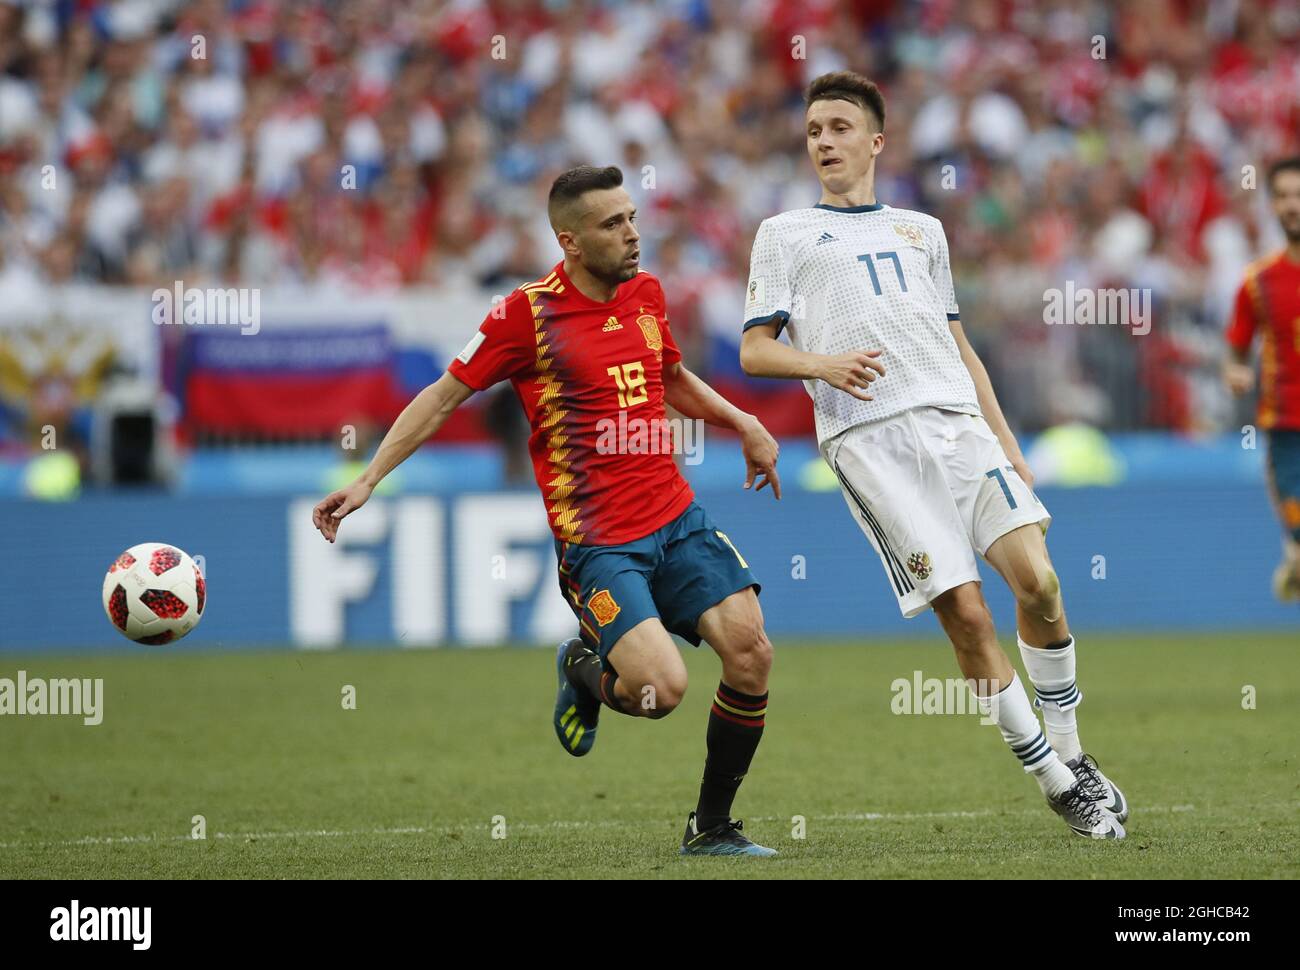 Jordi Alba of Spain and Aleksandr Samedov of Russia during the FIFA World Cup 2018 Round of 16 match at the Luzhniki Stadium, Moscow. Picture date 1st July 2018. Picture credit should read: David Klein/Sportimage via PA Images Stock Photo